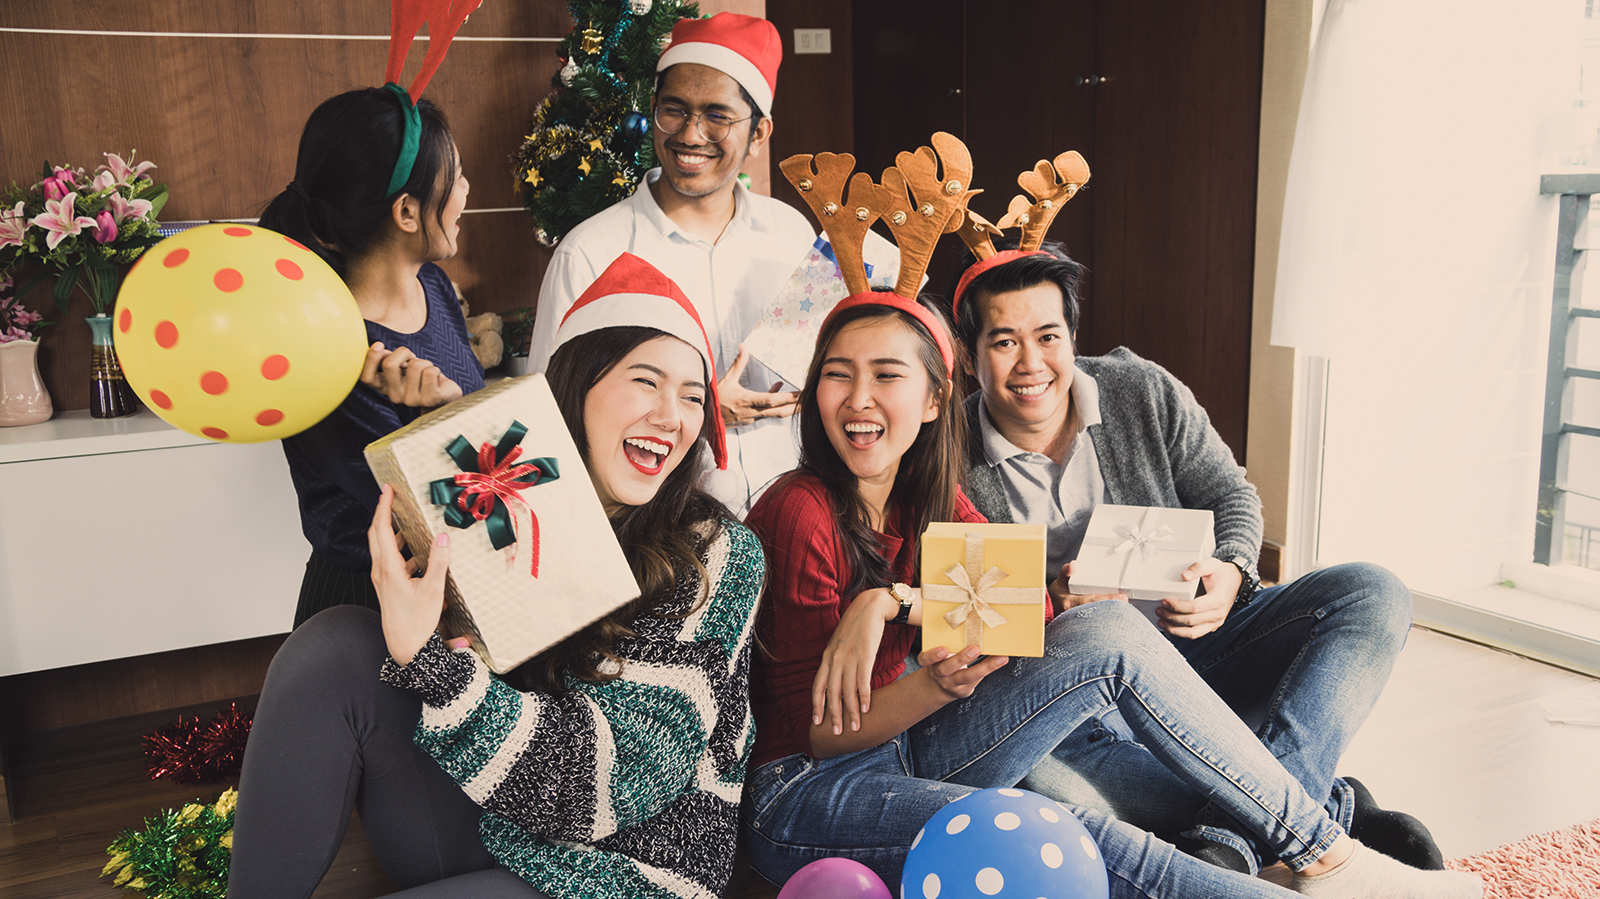 Four things we in Singapore can be grateful for this Christmas